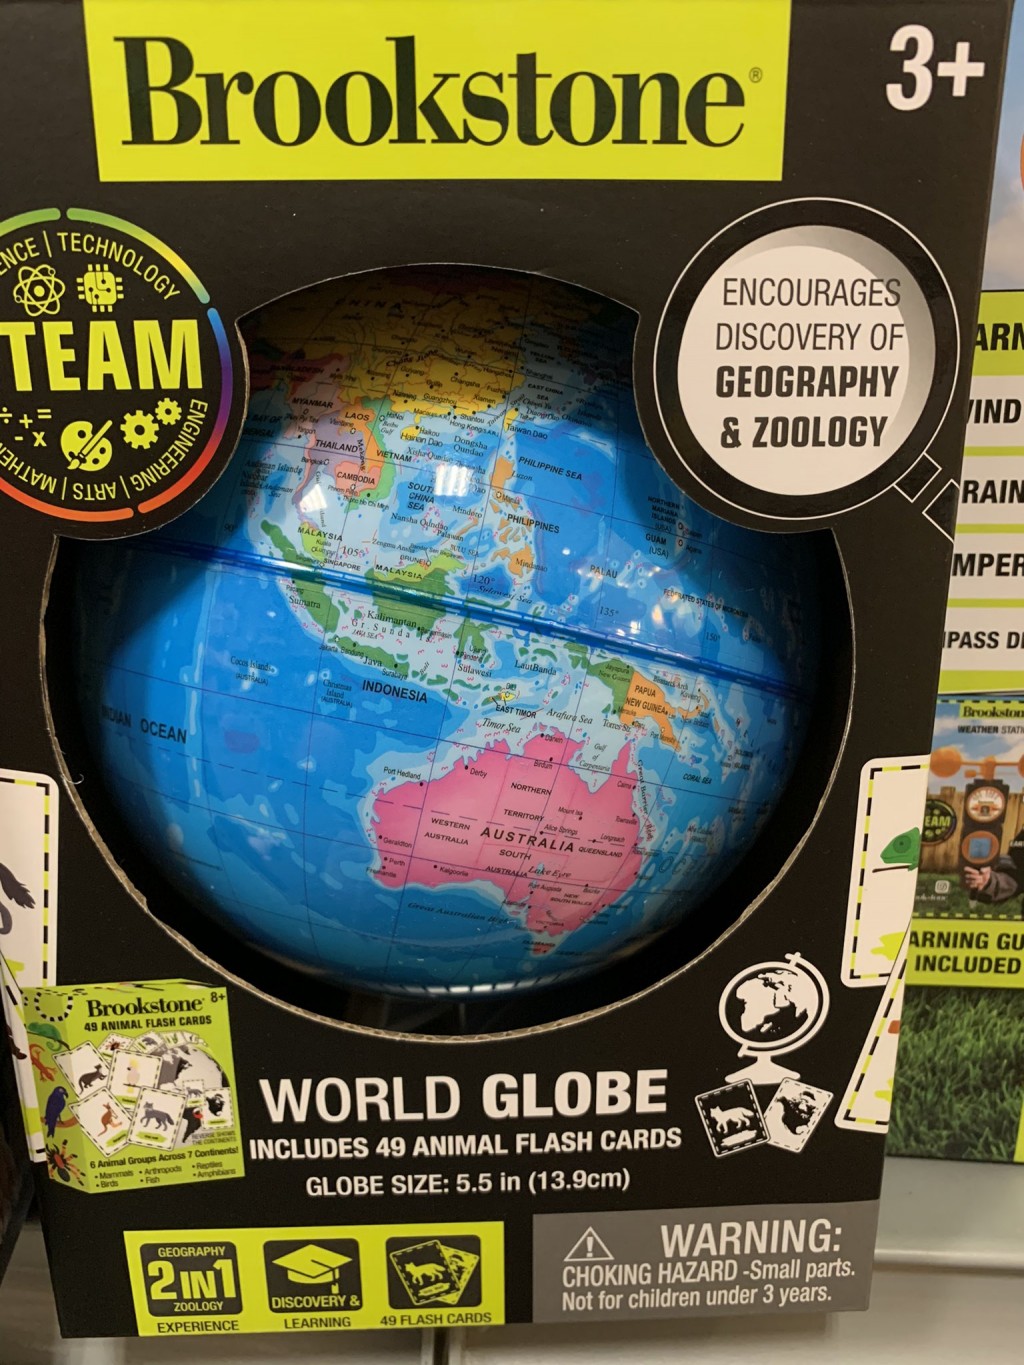 Brookstone hawks globe with 'Taiwan Dao' listed as part of China